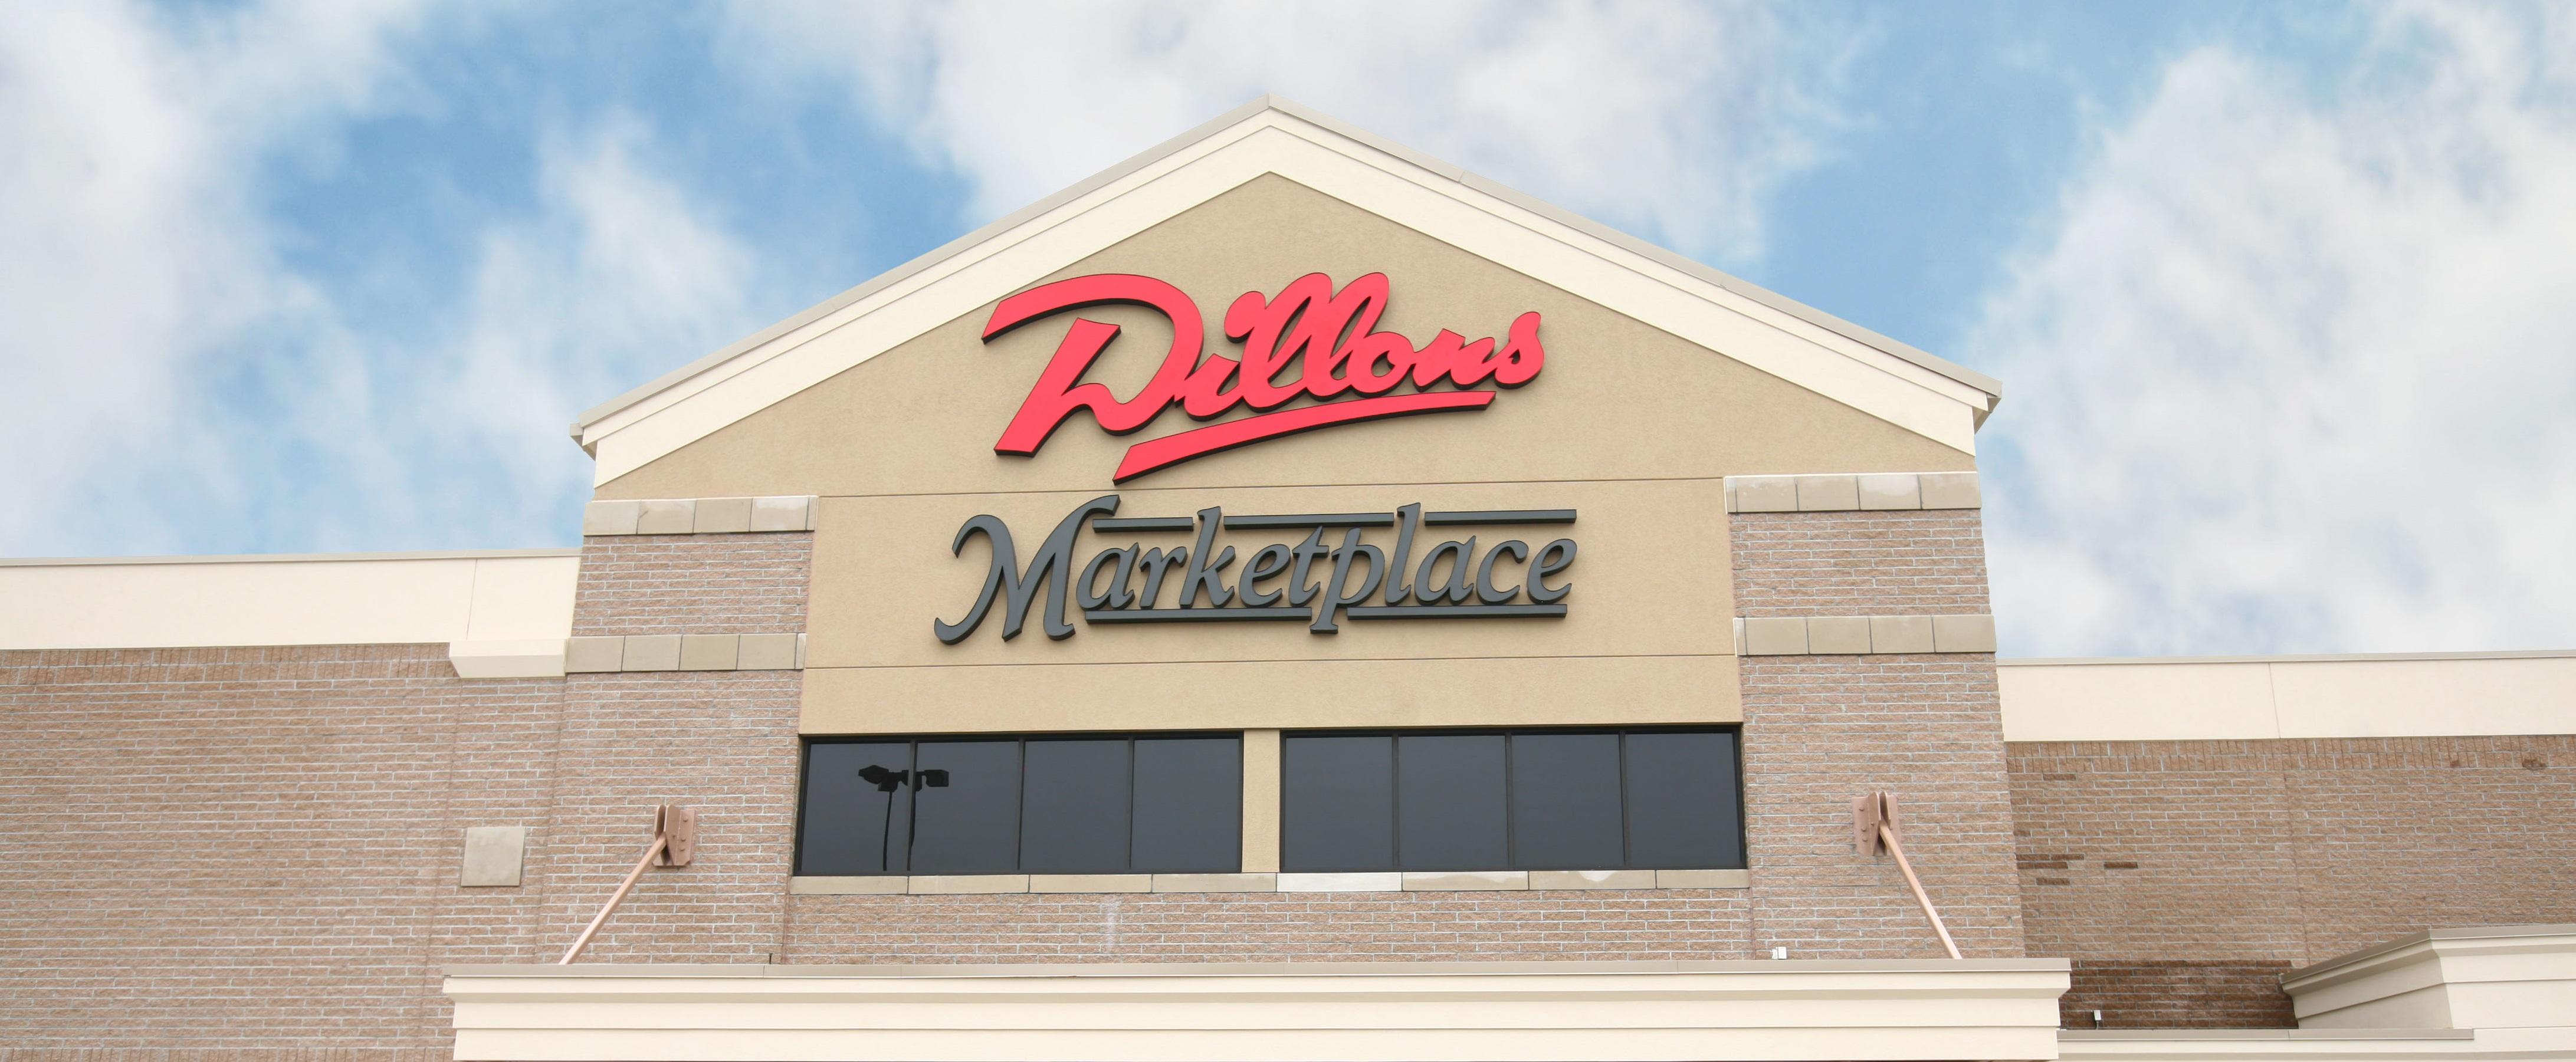 Dillons in Wichita, KS (Groceries & Convenience Stores) 3167295200